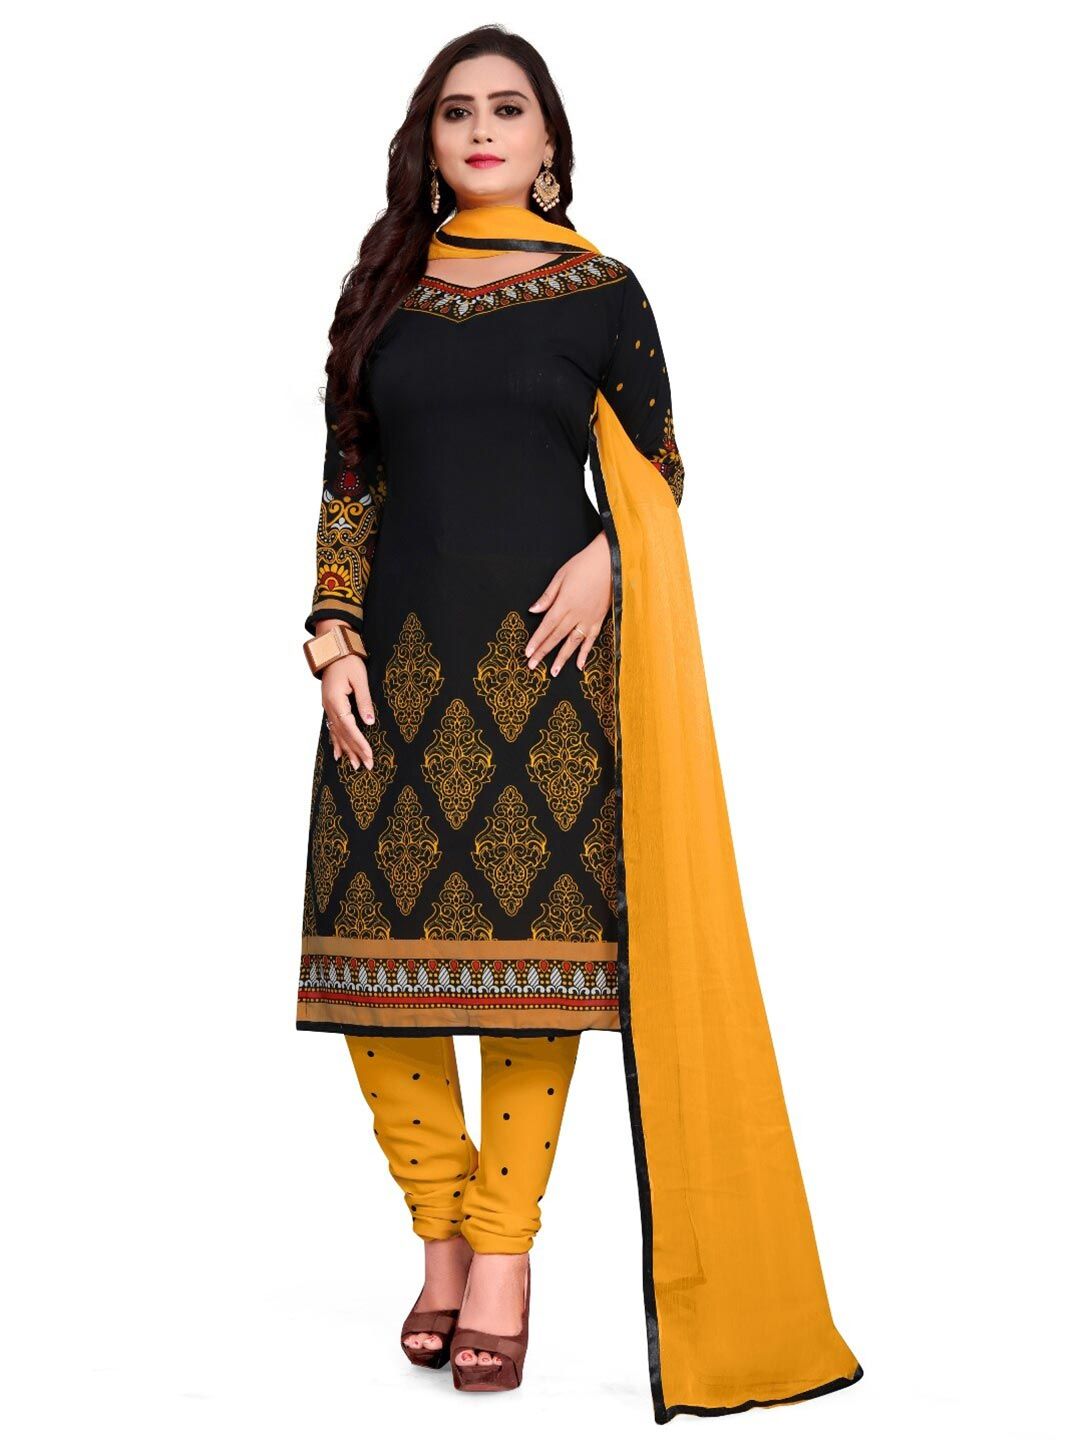 INDIAN HERITAGE Black & Yellow Printed Silk Crepe Unstitched Dress Material Price in India